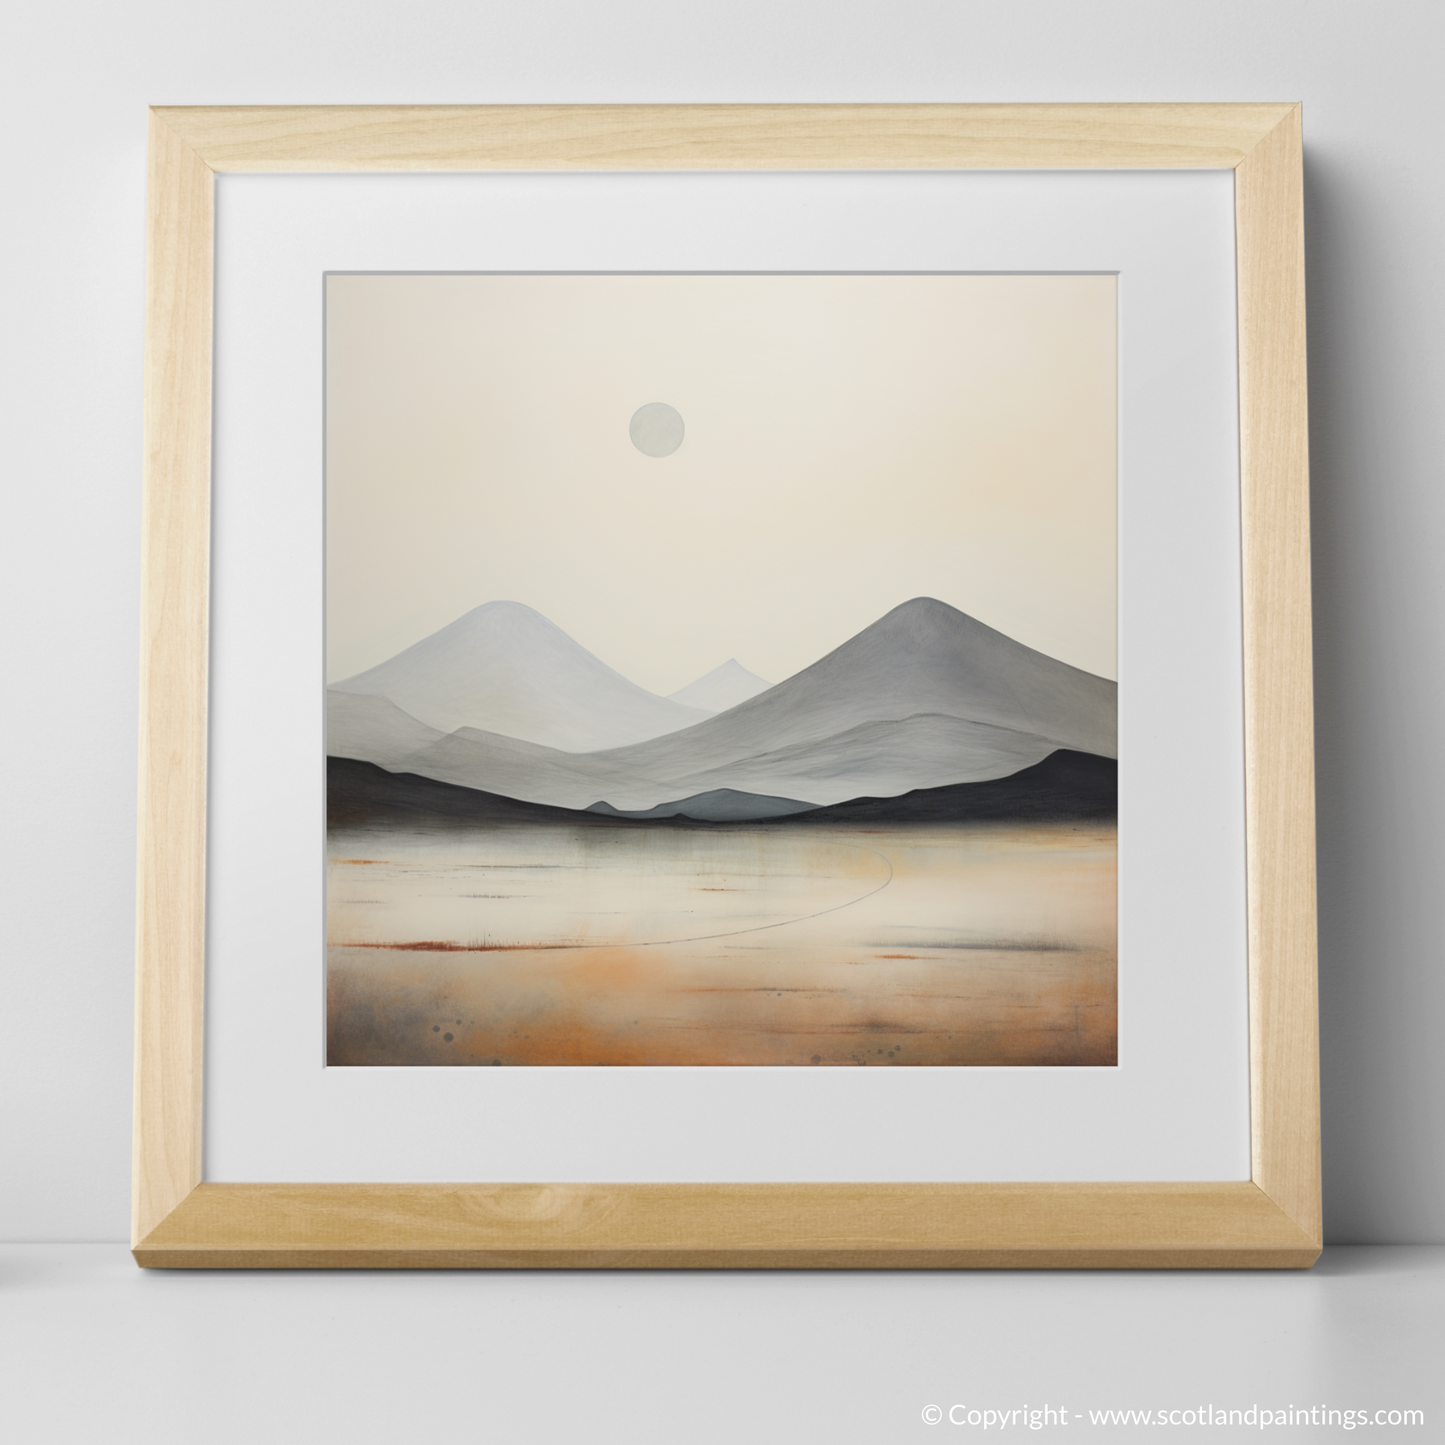 Art Print of Meall Greigh with a natural frame